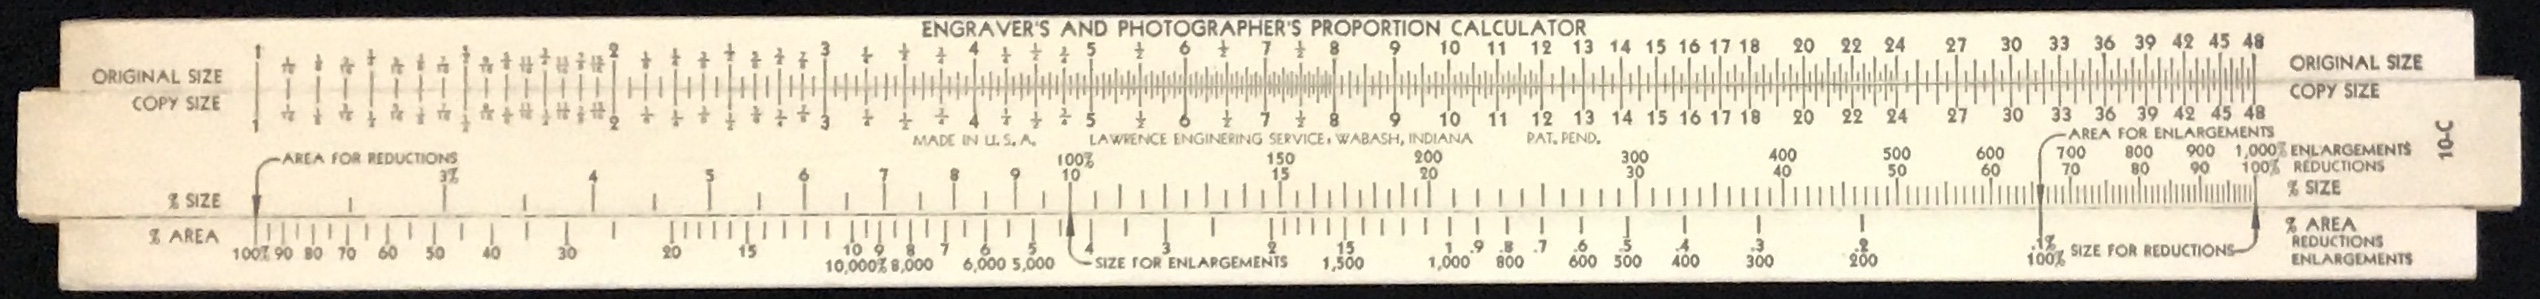 Lawrence Engraver’s and Photographer’s Proportion Calculator, c. 1935-38.